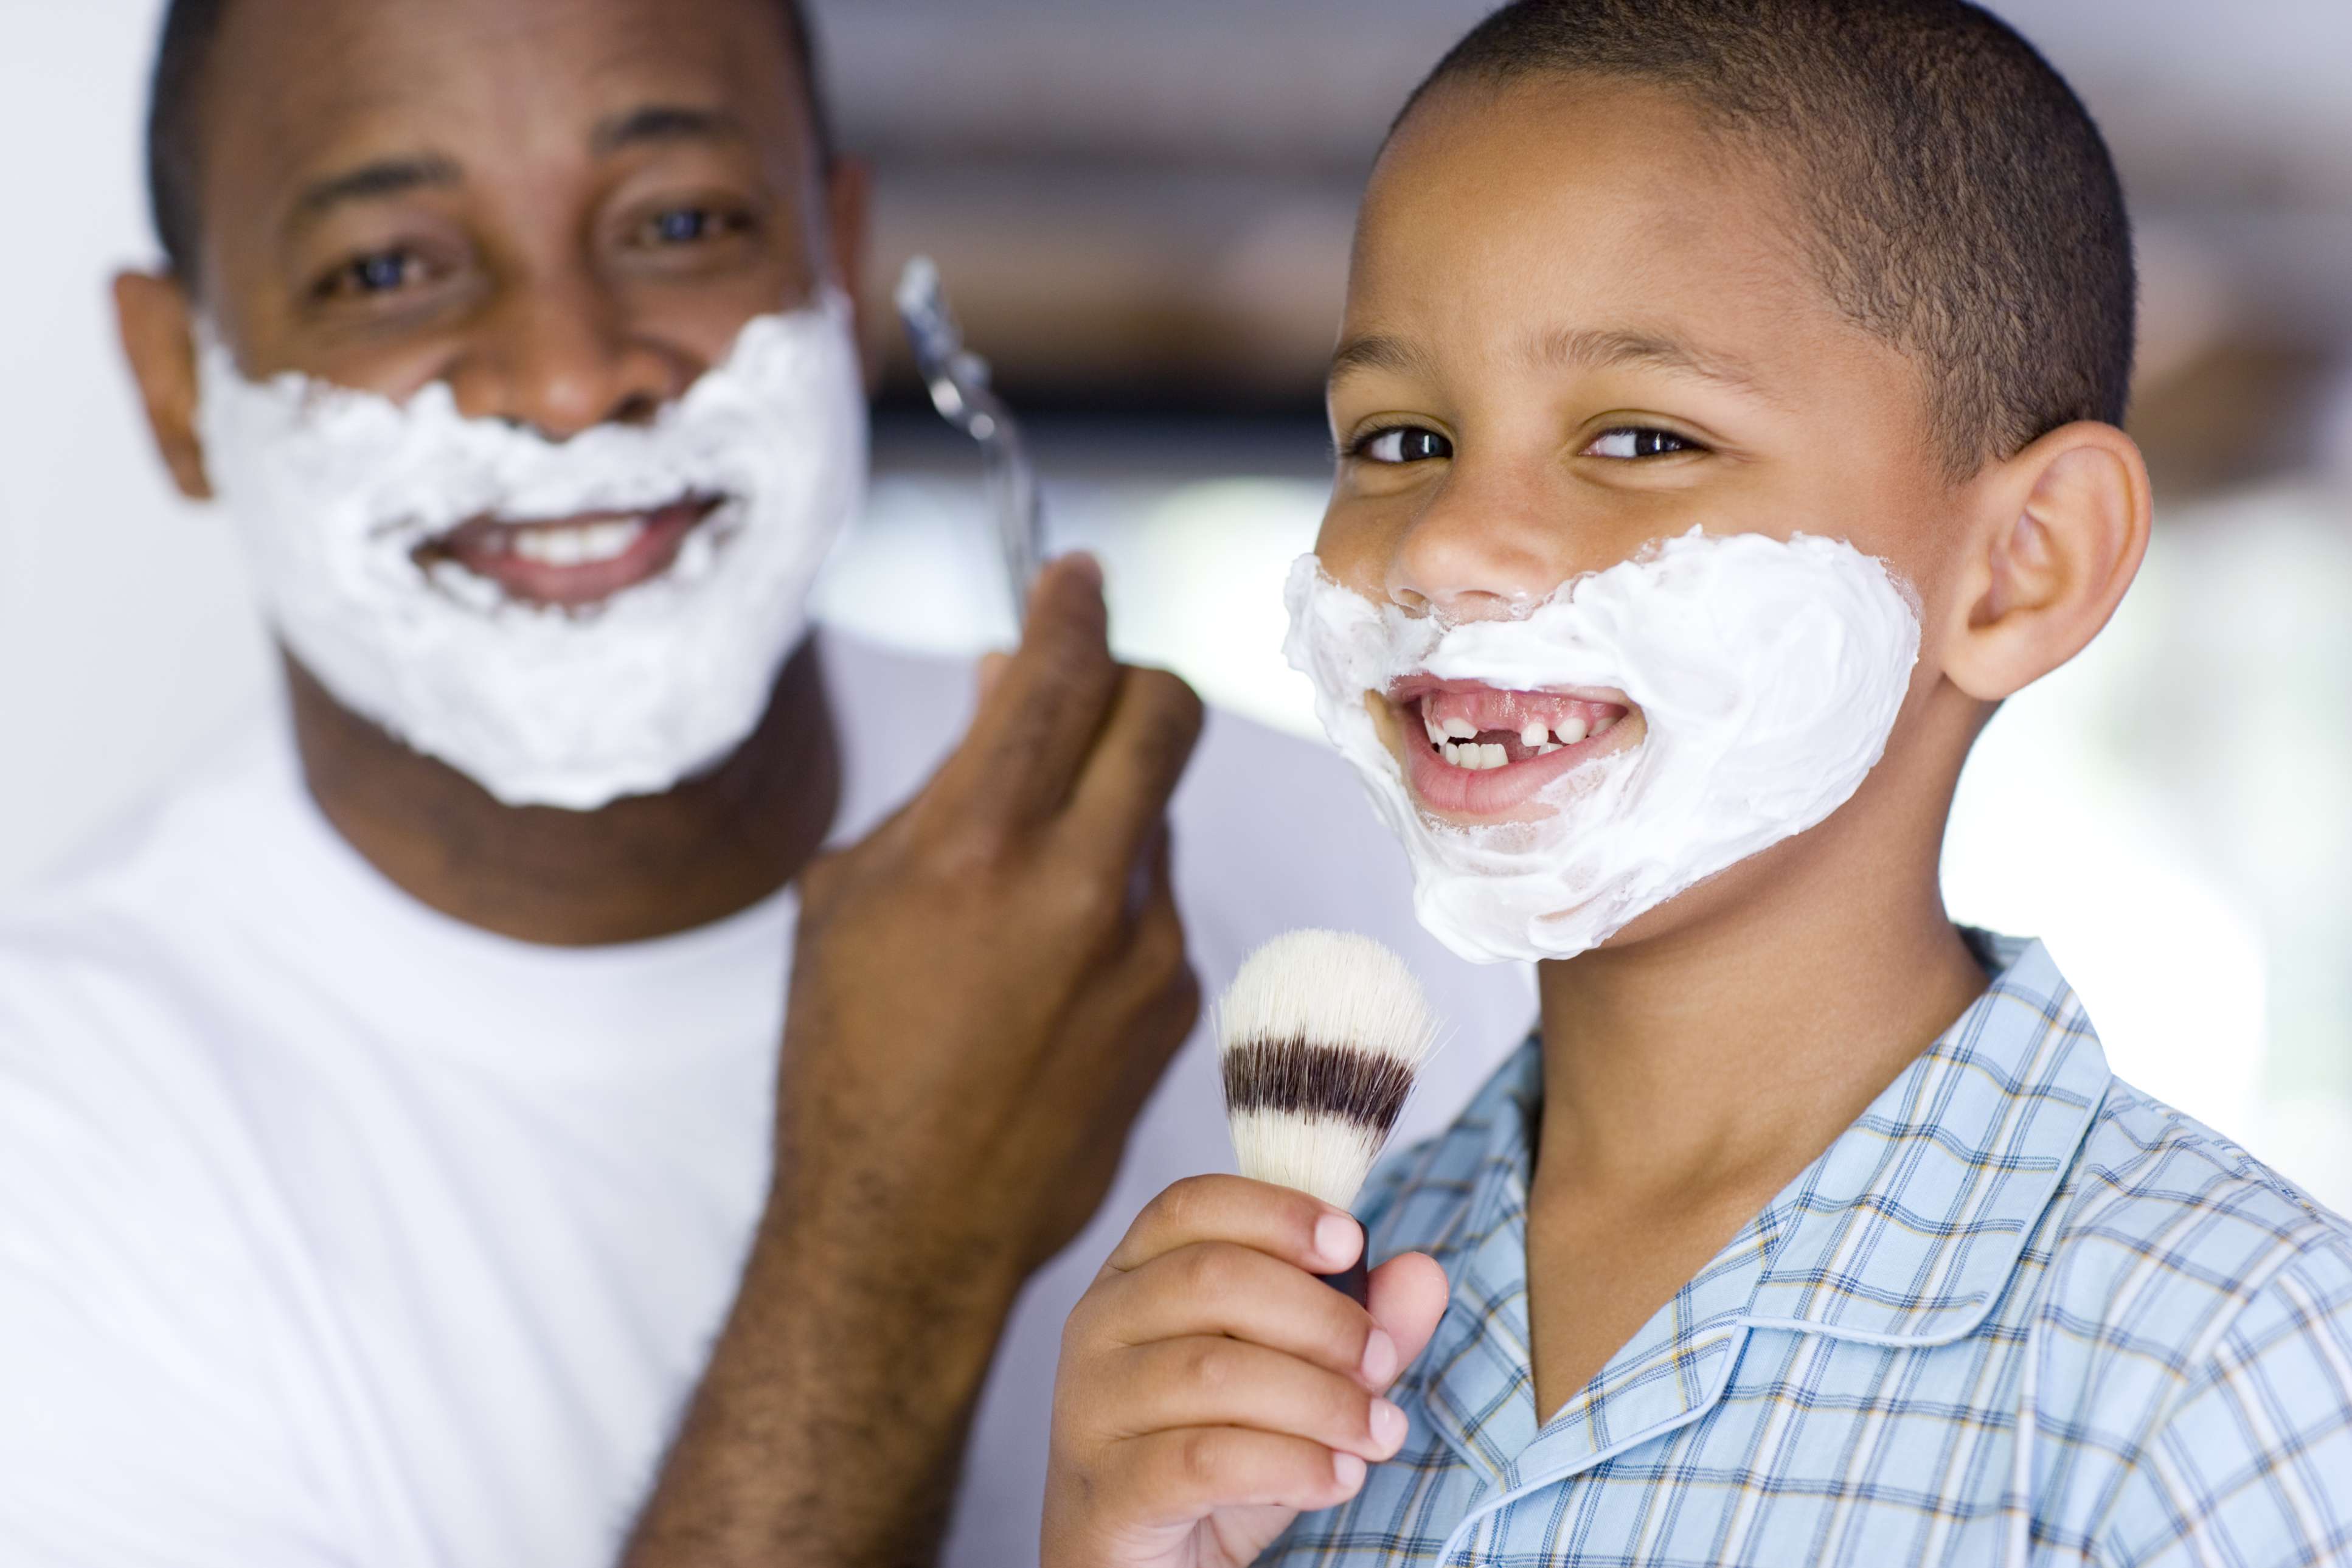 The image shows a boy and his father. Both have shaving cream on their face. The man has a razor in his hand, while the boy holds a shaving cream brush.